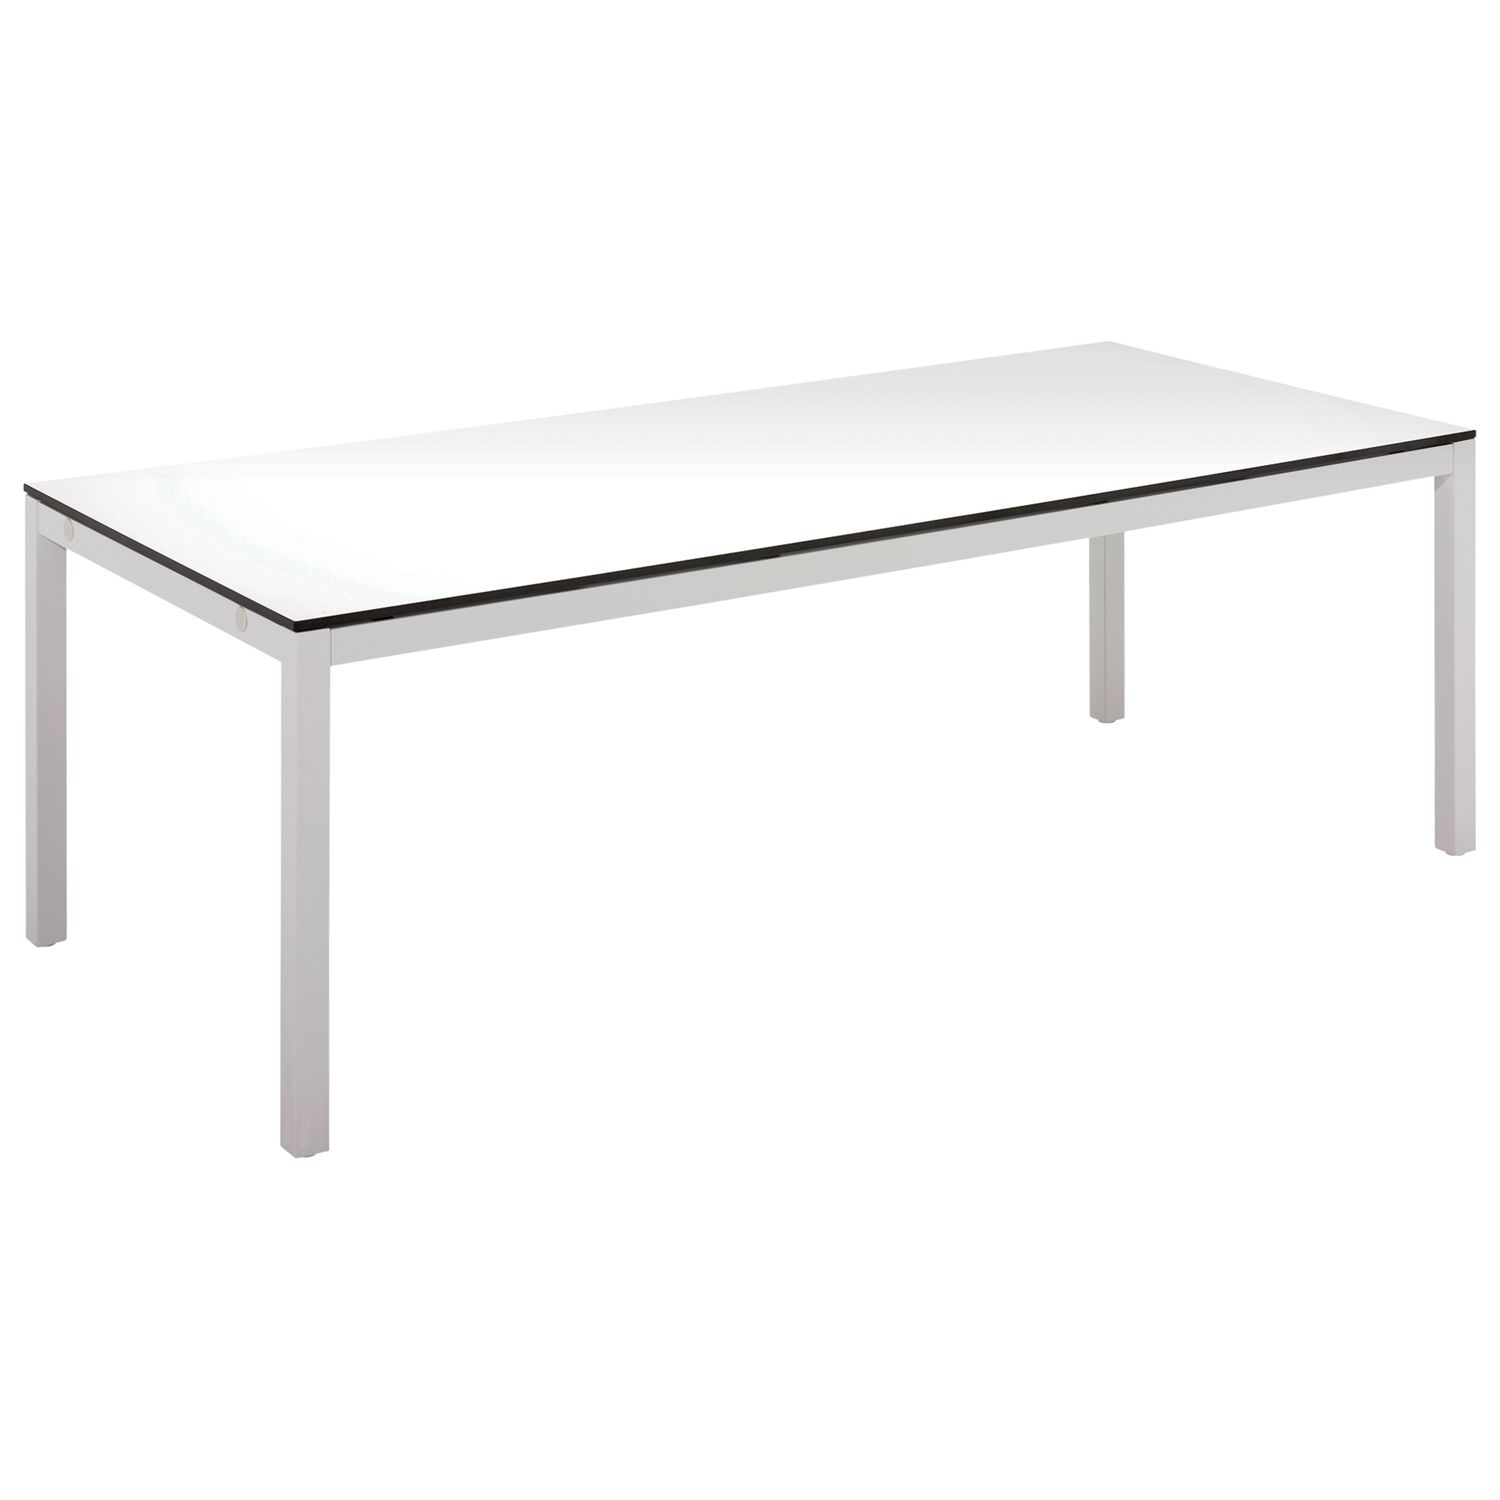 Gloster Riva Rectangular 8 Seater Outdoor Dining Table, White HPL/Crystal White